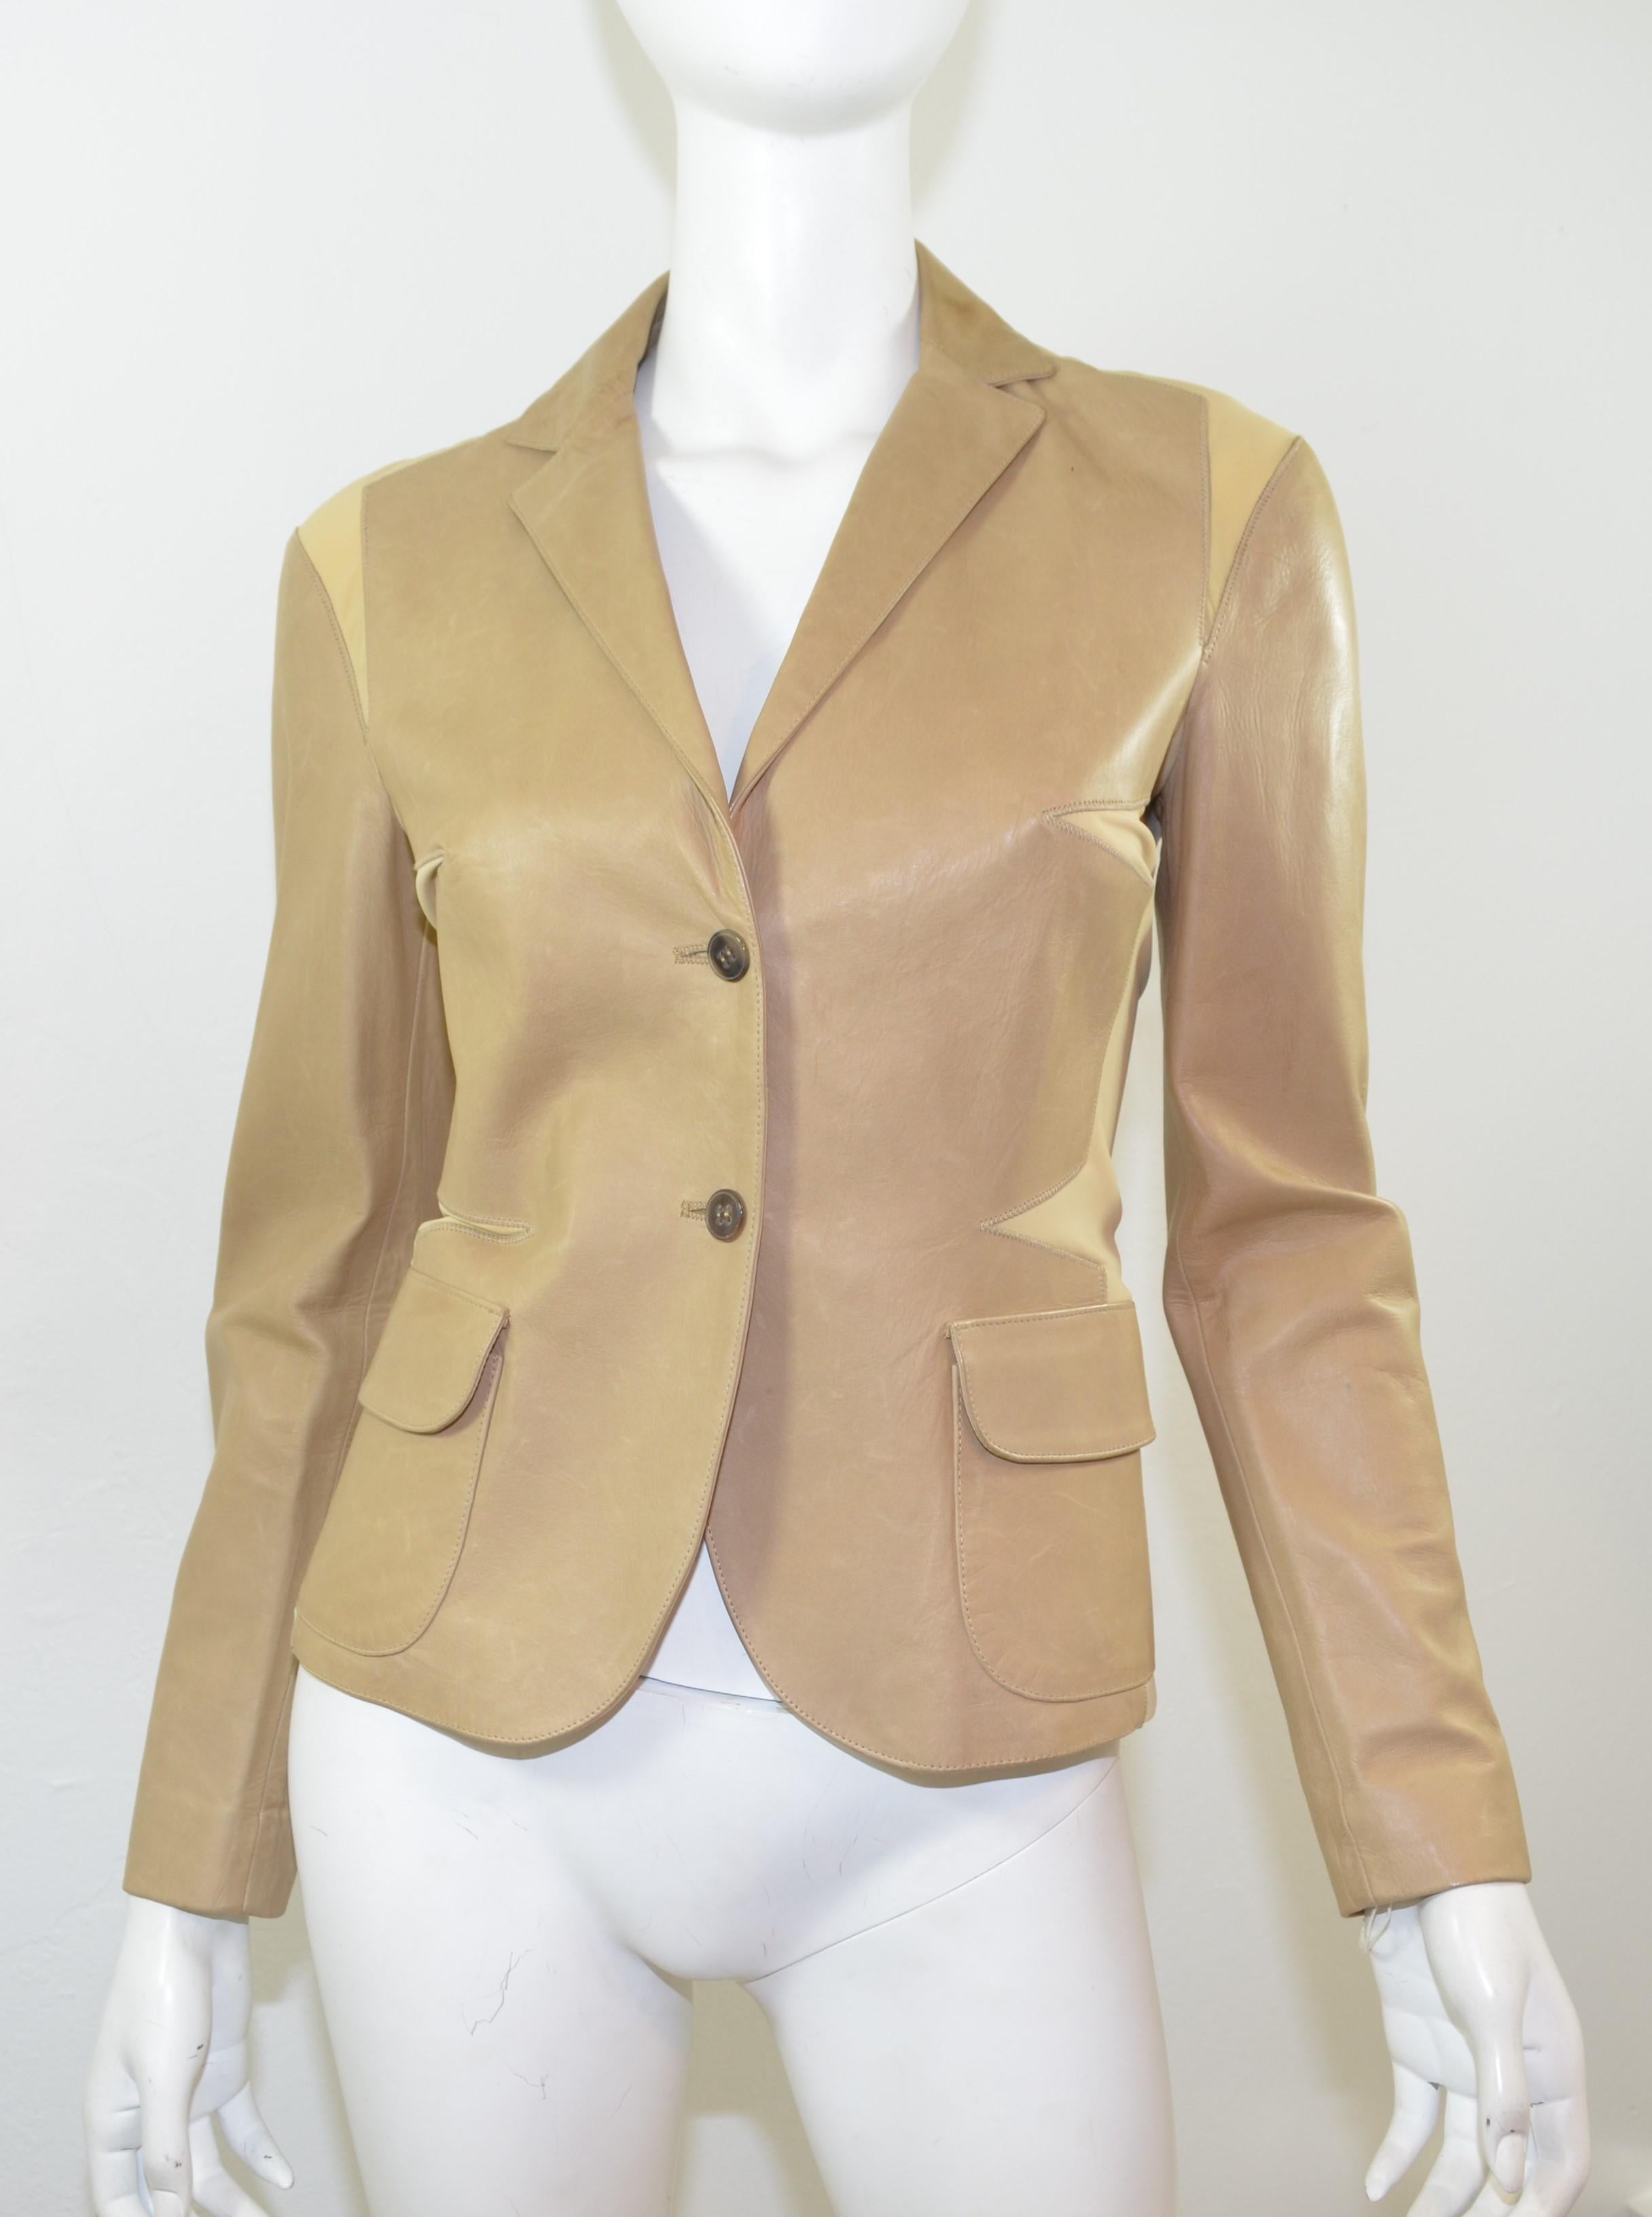 Gucci blazer jacket featured in a tan color with genuine leather and mesh panels along the bodice and elbows. Blazer has button fastenings at the front and on the cuffs. Size 40, made in Italy. 

Bust 34''
Length 24''
Sleeves 24''